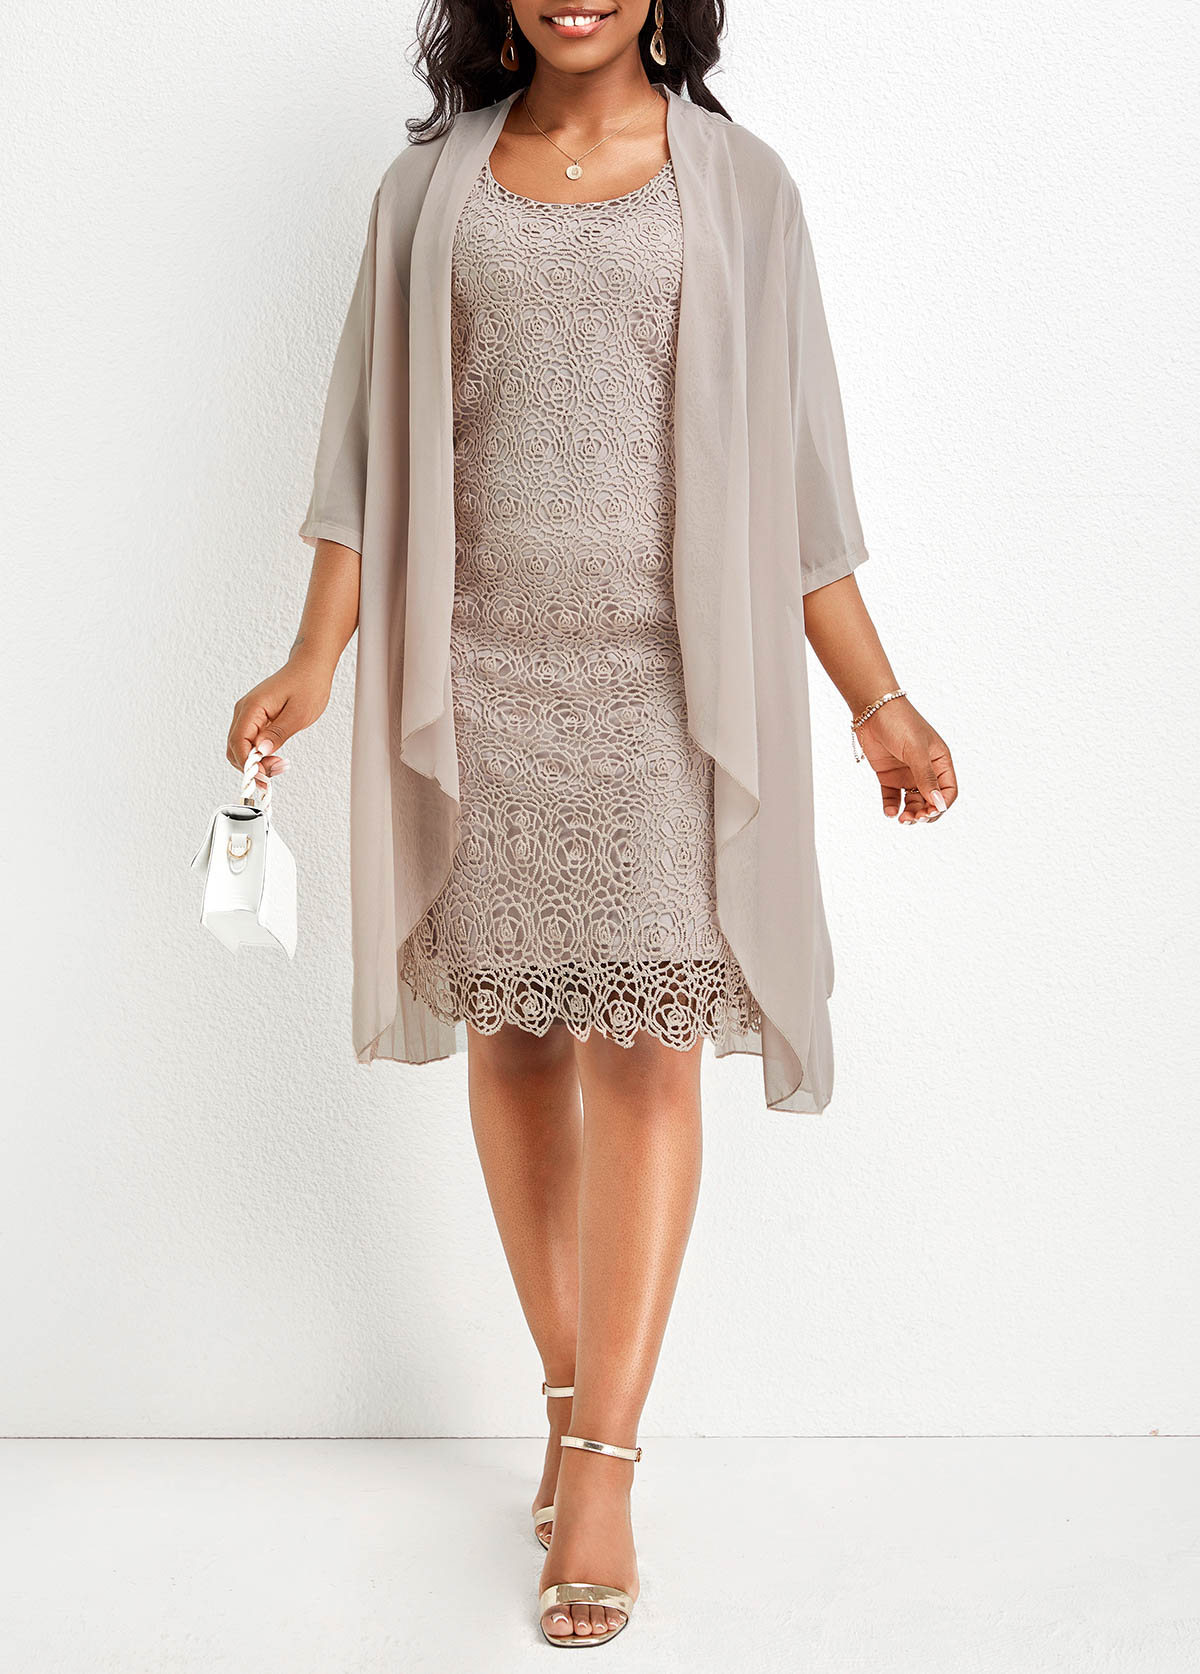 Scoop Neck Two Piece Skin Color Dress and Cardigan